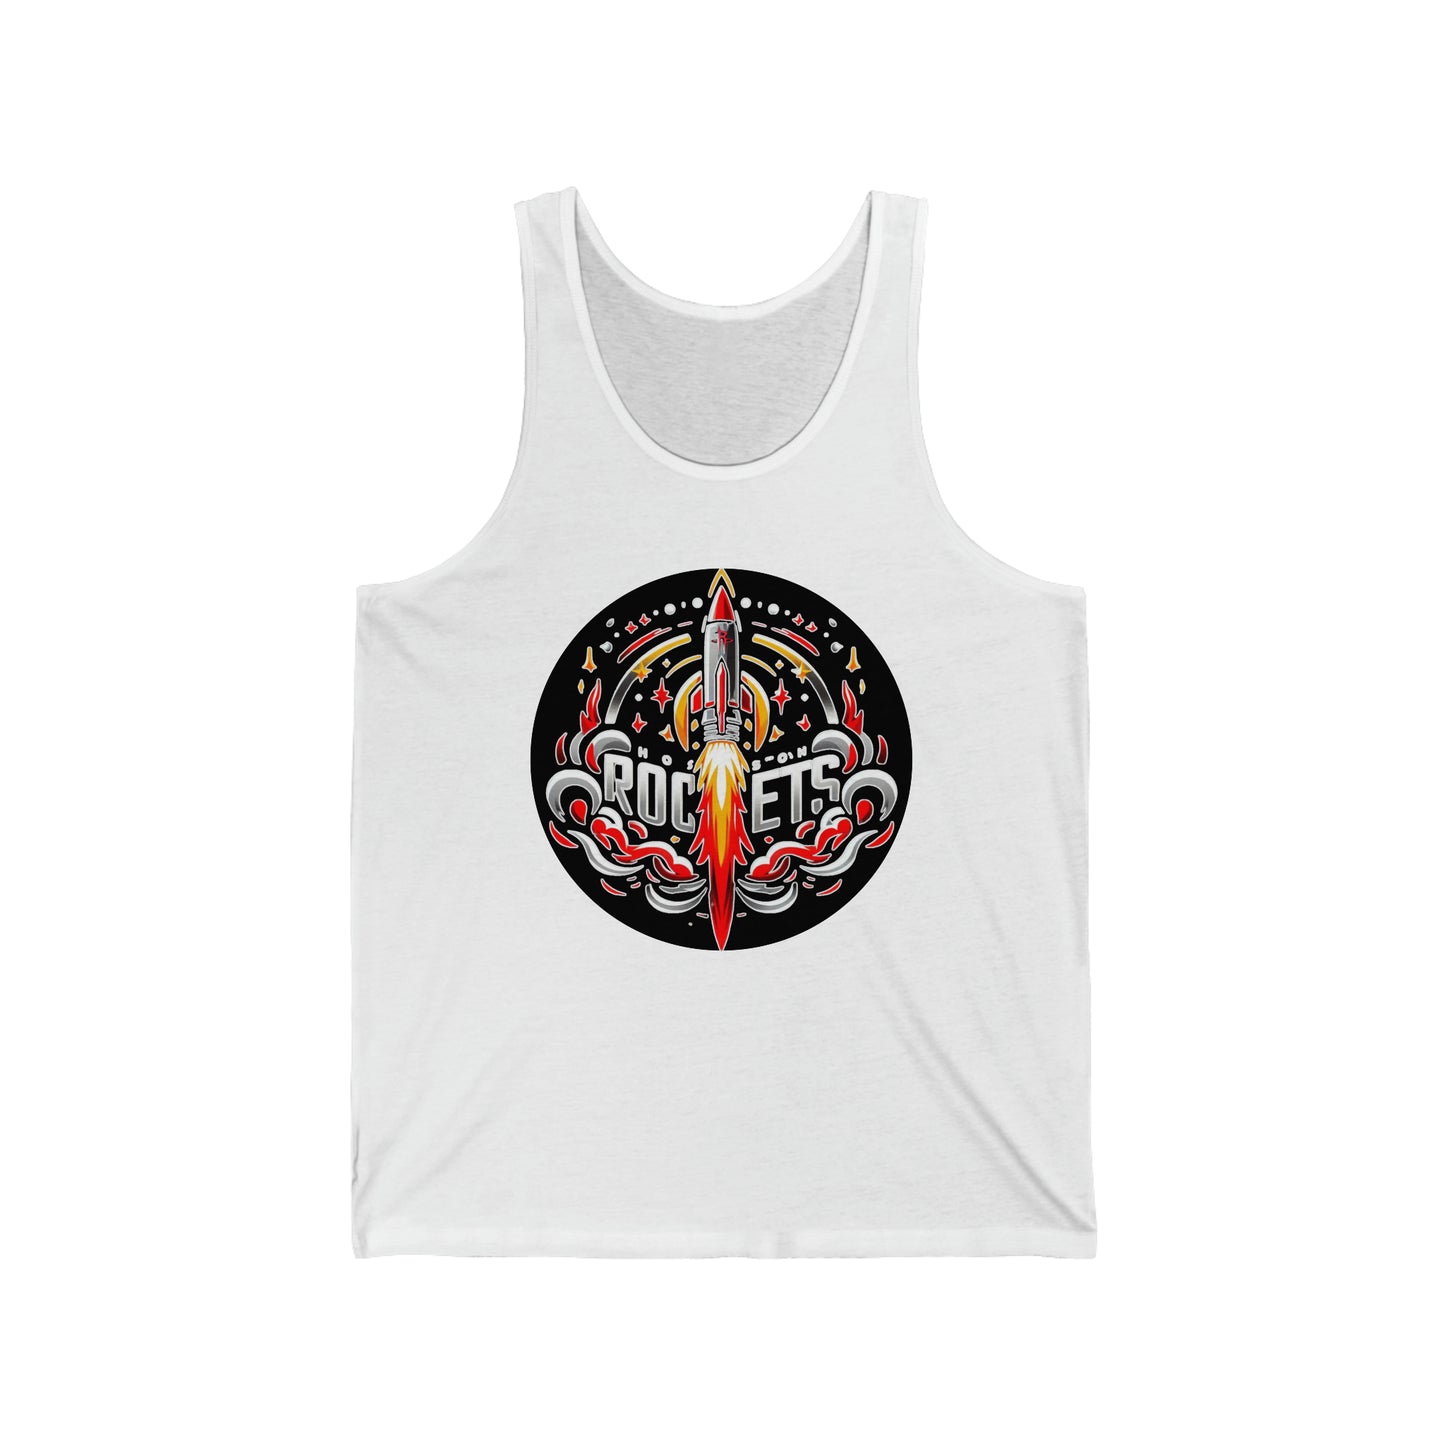 Cool and comfortable unisex Jersey Tank top (Houston Rockets, NBA basketball team)